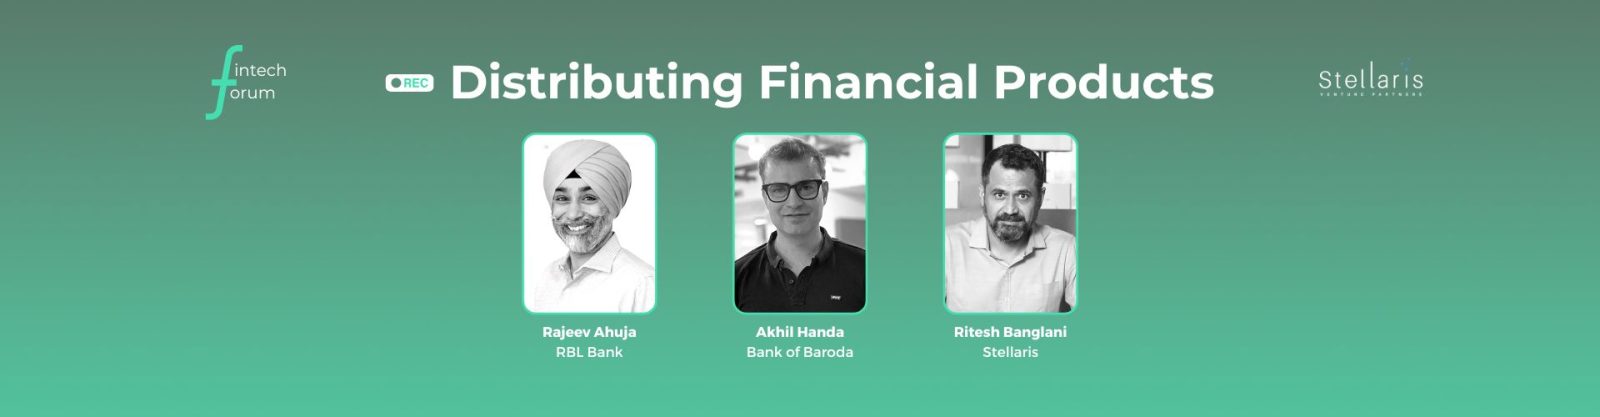 Fintech Forum #4: Distributing Financial Products